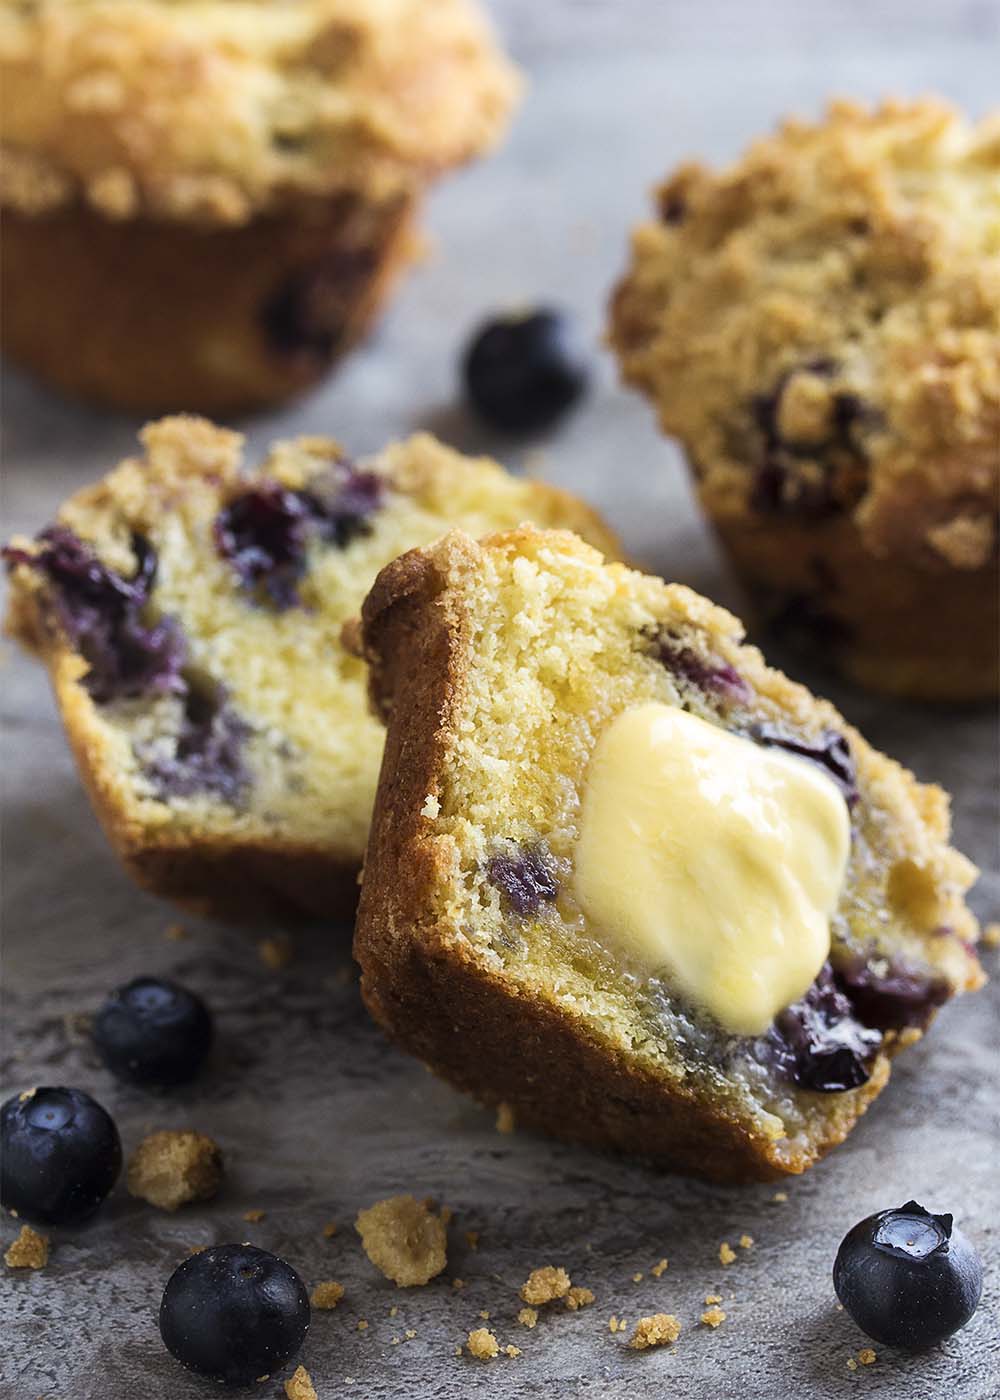 Meyer lemons provide a great, complex, floral flavor to this easy recipe for crumb topped blueberry ricotta muffins. Great for breakfast or any time of the day! | justalittlebitofbacon.com